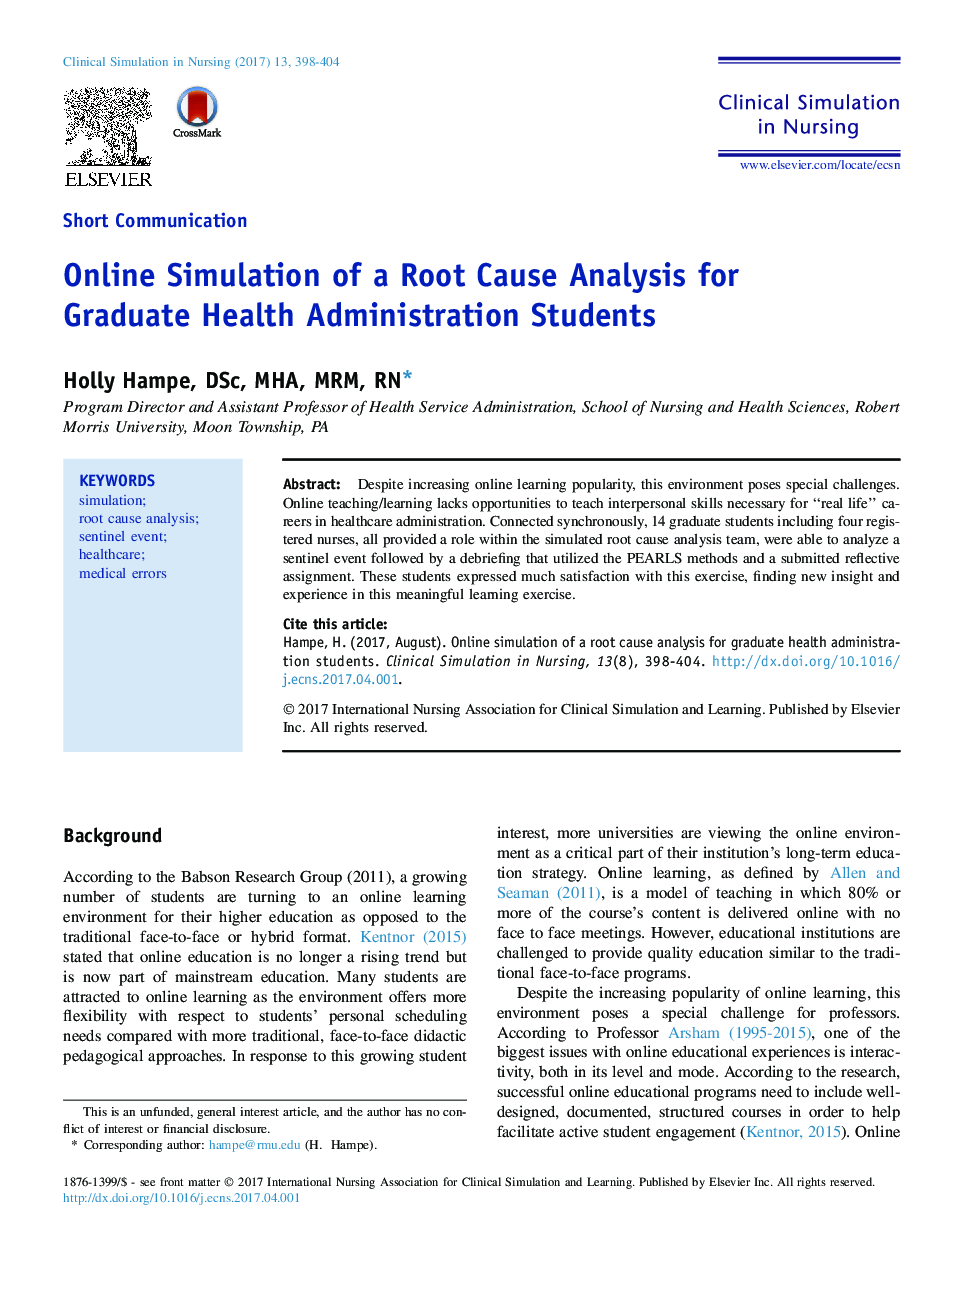 Online Simulation of a Root Cause Analysis for Graduate Health Administration Students